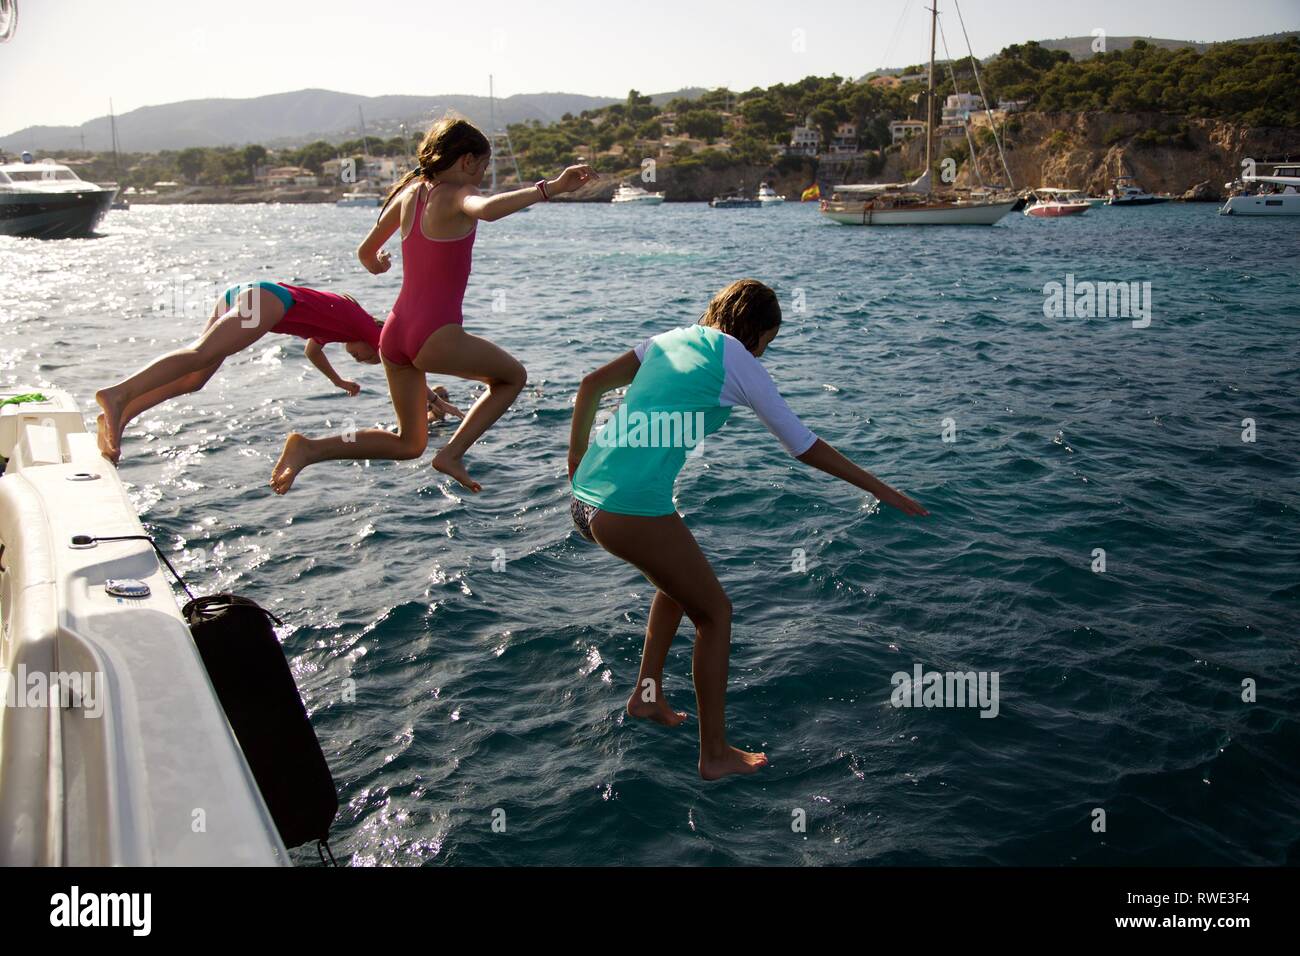 Kids jump from boat into mediterranean sea Stock Photo